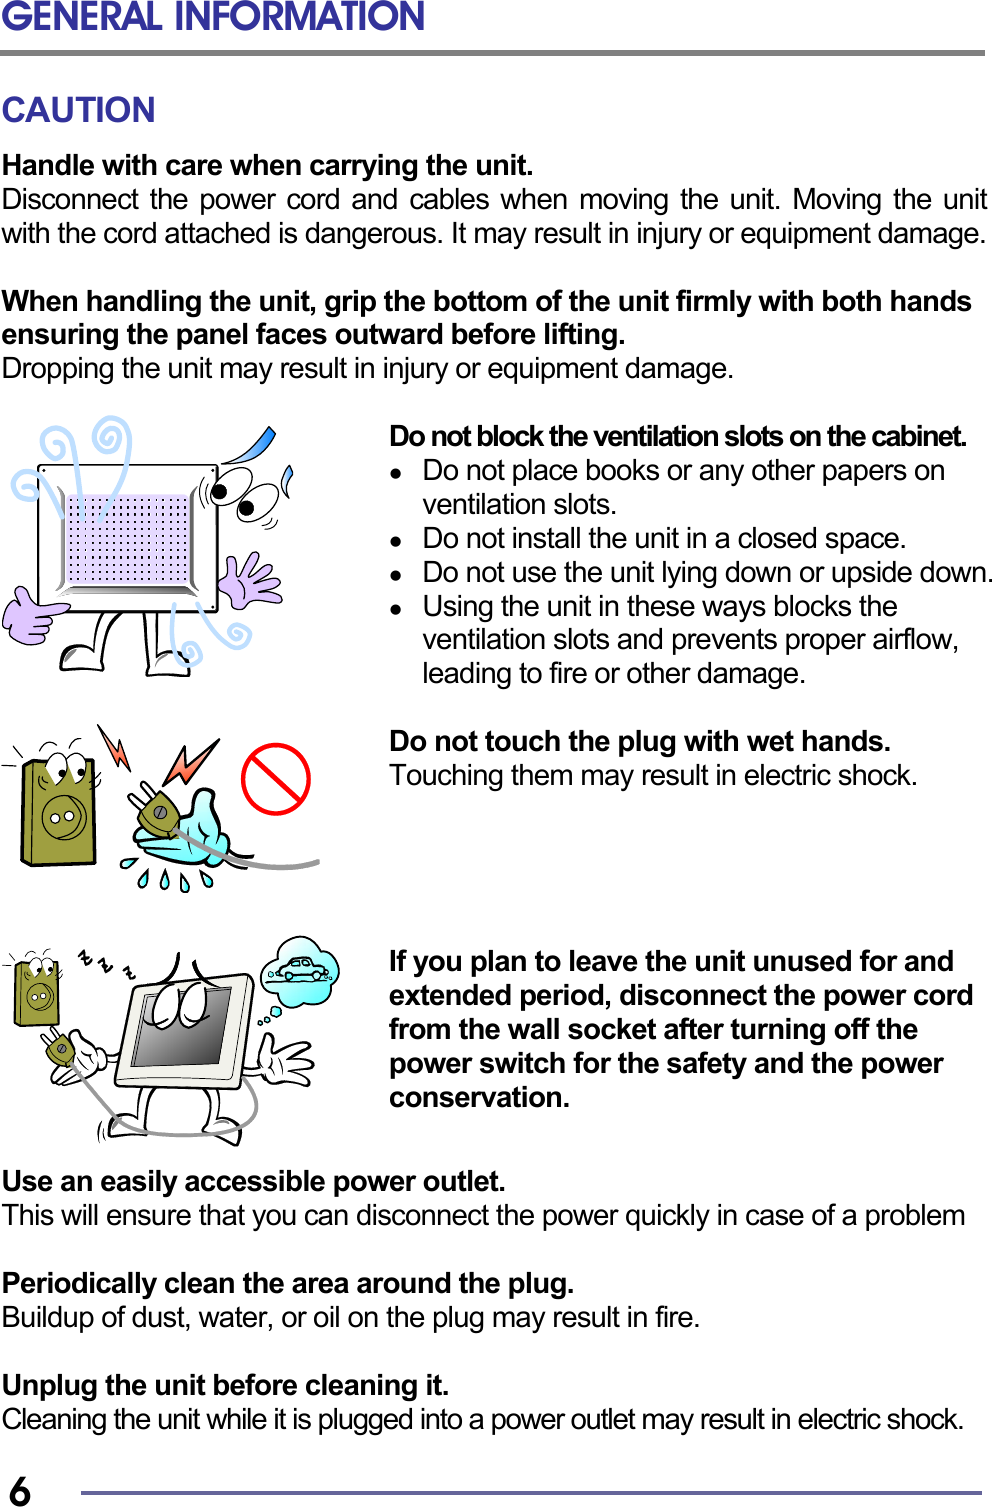 GENERAL INFORMATION   6 CAUTION Handle with care when carrying the unit. Disconnect the power cord and cables when moving the unit. Moving the unit with the cord attached is dangerous. It may result in injury or equipment damage.  When handling the unit, grip the bottom of the unit firmly with both hands ensuring the panel faces outward before lifting. Dropping the unit may result in injury or equipment damage.  Do not block the ventilation slots on the cabinet.   Do not place books or any other papers on ventilation slots.   Do not install the unit in a closed space.   Do not use the unit lying down or upside down.   Using the unit in these ways blocks the ventilation slots and prevents proper airflow, leading to fire or other damage.  Do not touch the plug with wet hands. Touching them may result in electric shock.      If you plan to leave the unit unused for and extended period, disconnect the power cord from the wall socket after turning off the power switch for the safety and the power conservation.   Use an easily accessible power outlet. This will ensure that you can disconnect the power quickly in case of a problem  Periodically clean the area around the plug. Buildup of dust, water, or oil on the plug may result in fire.  Unplug the unit before cleaning it. Cleaning the unit while it is plugged into a power outlet may result in electric shock. 